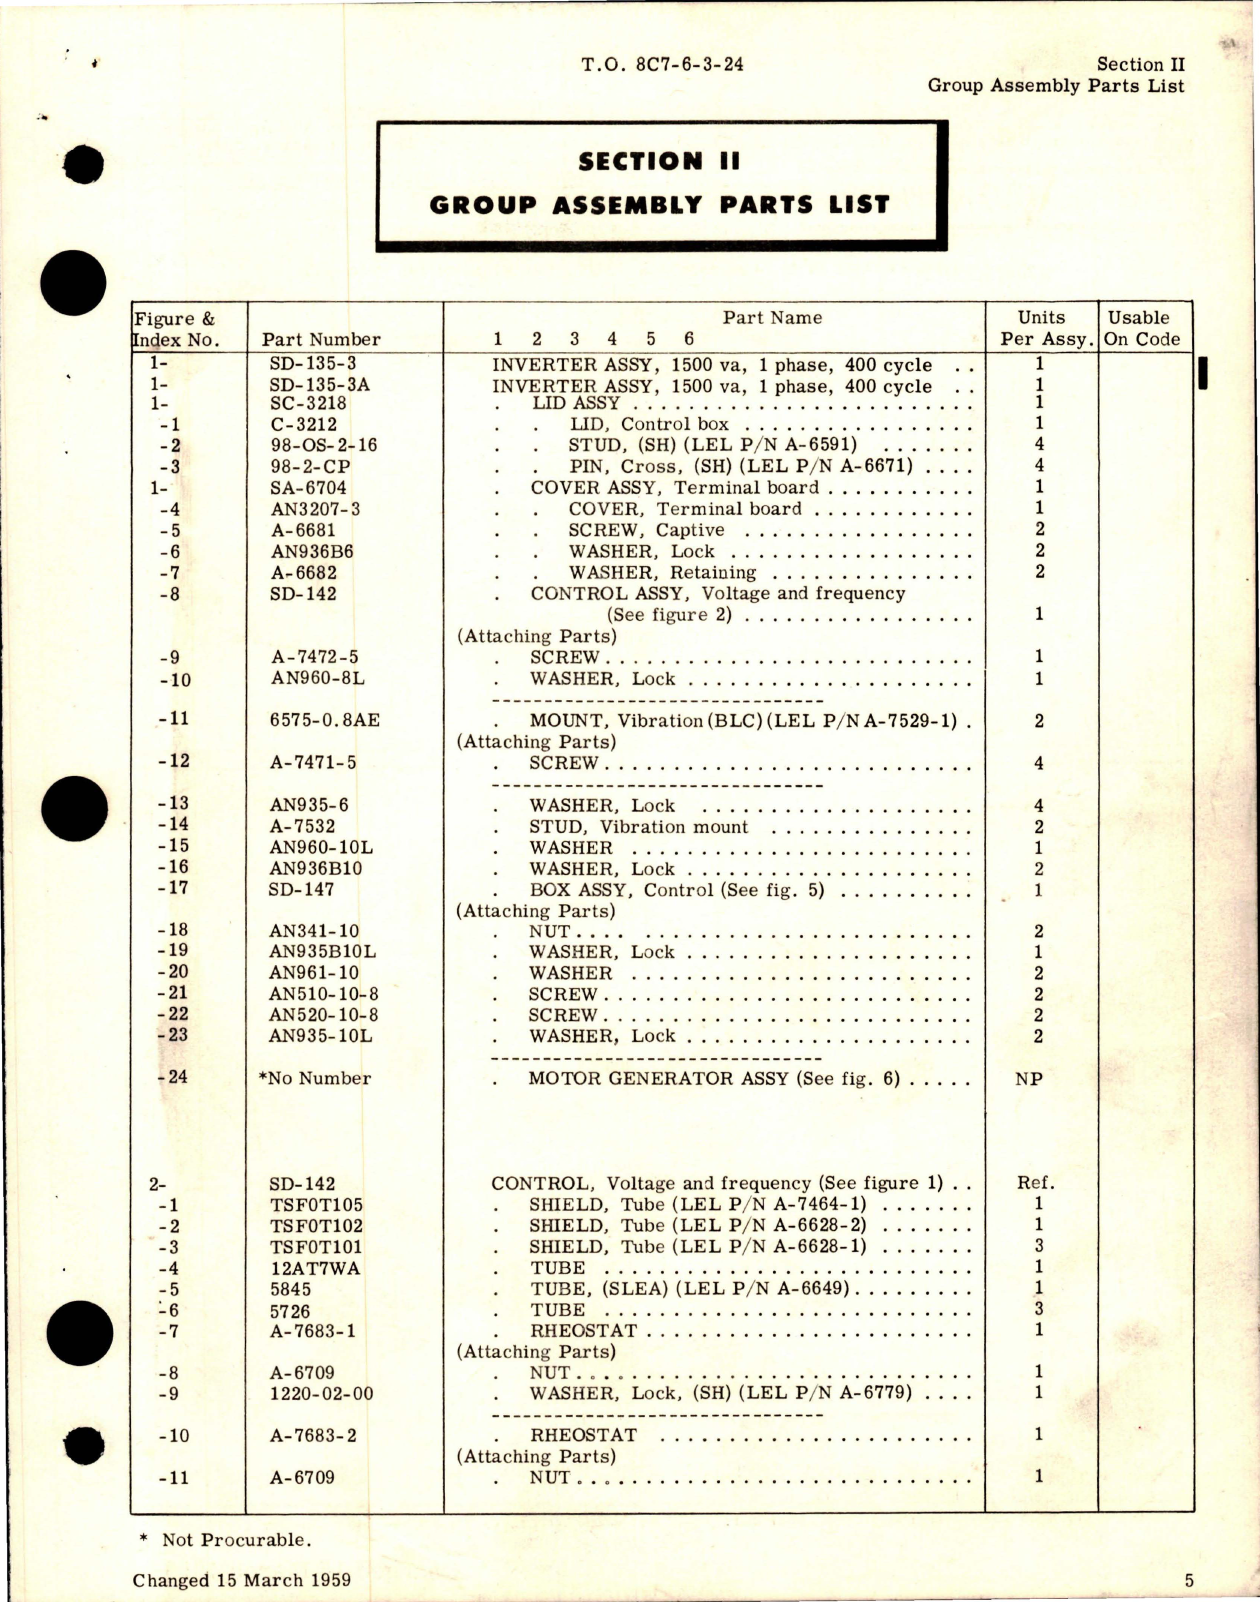 Sample page 7 from AirCorps Library document: Illustrated Parts Breakdown for AN 3515-1 Inverter - Parts SD-135-3 and SD-135-3A 